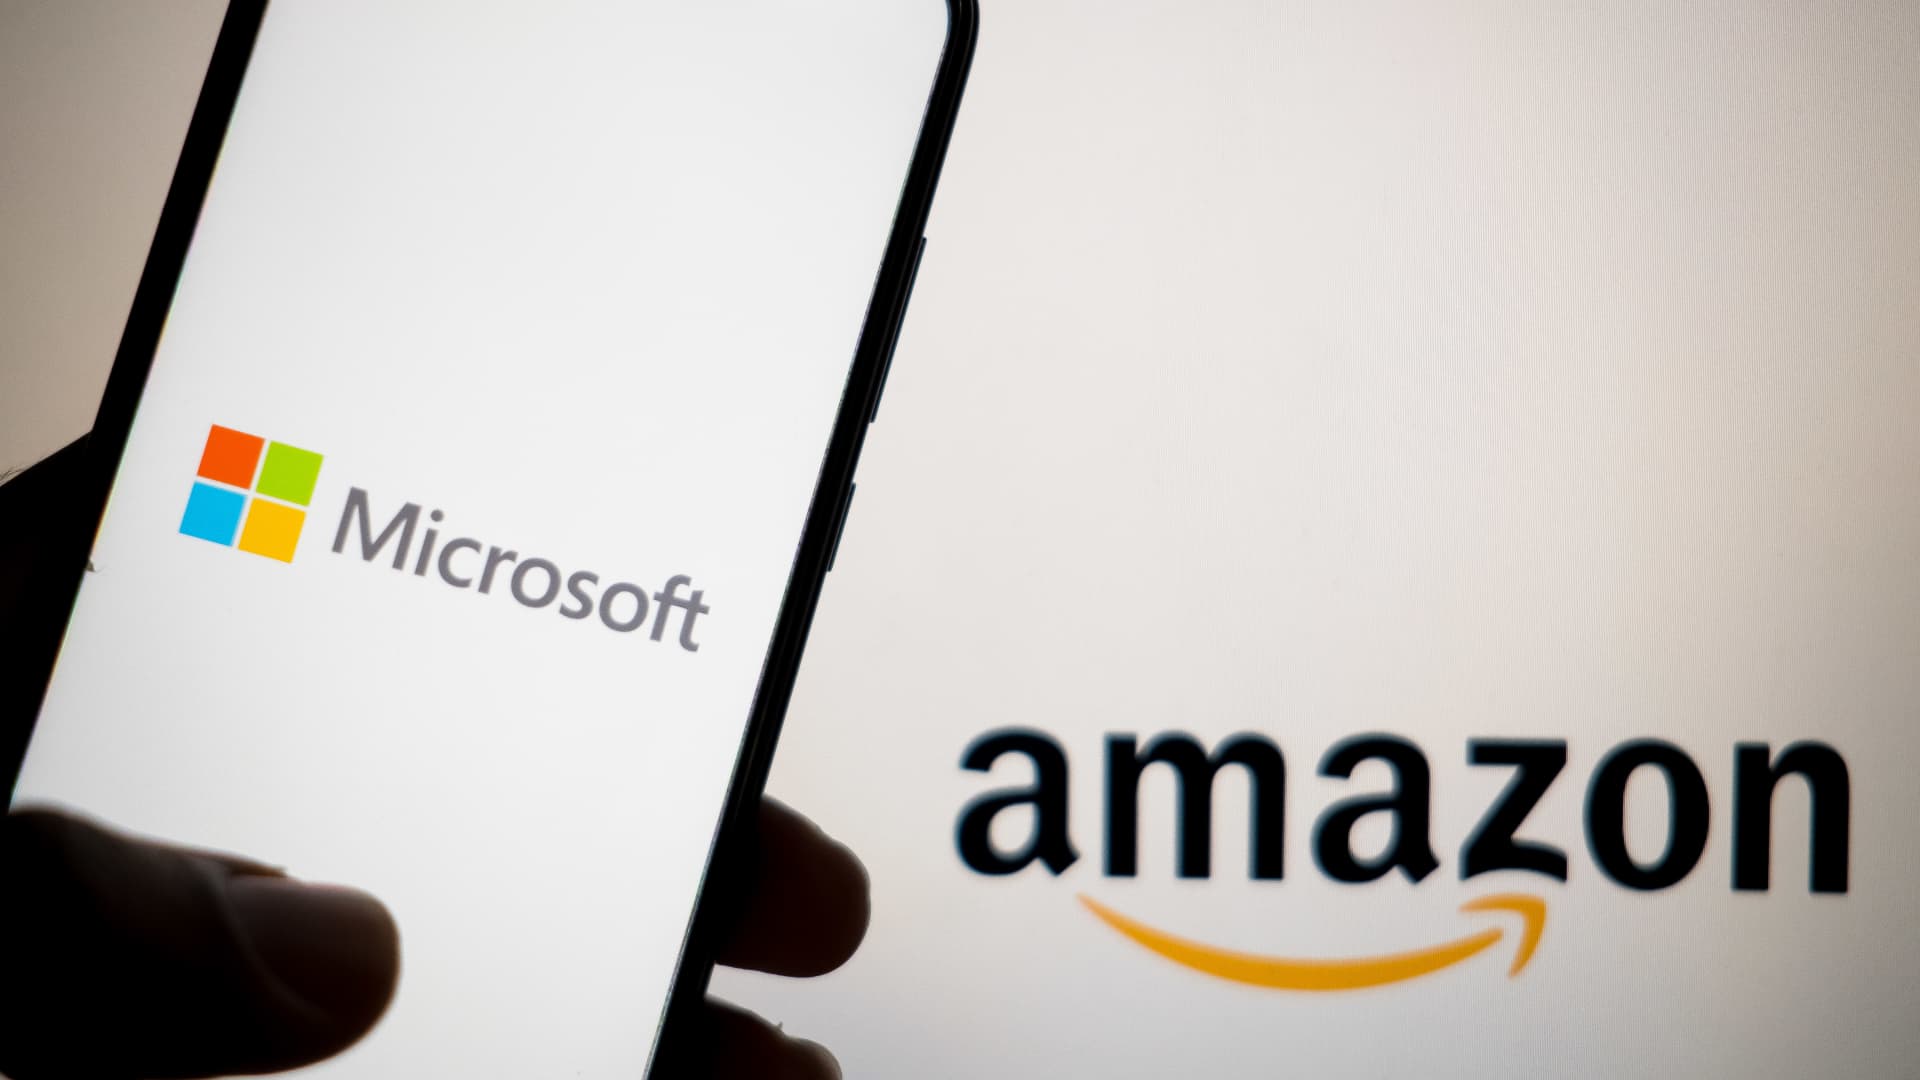 Amazon and Microsoft to invest .6 billion into France as Macron courts tech giants